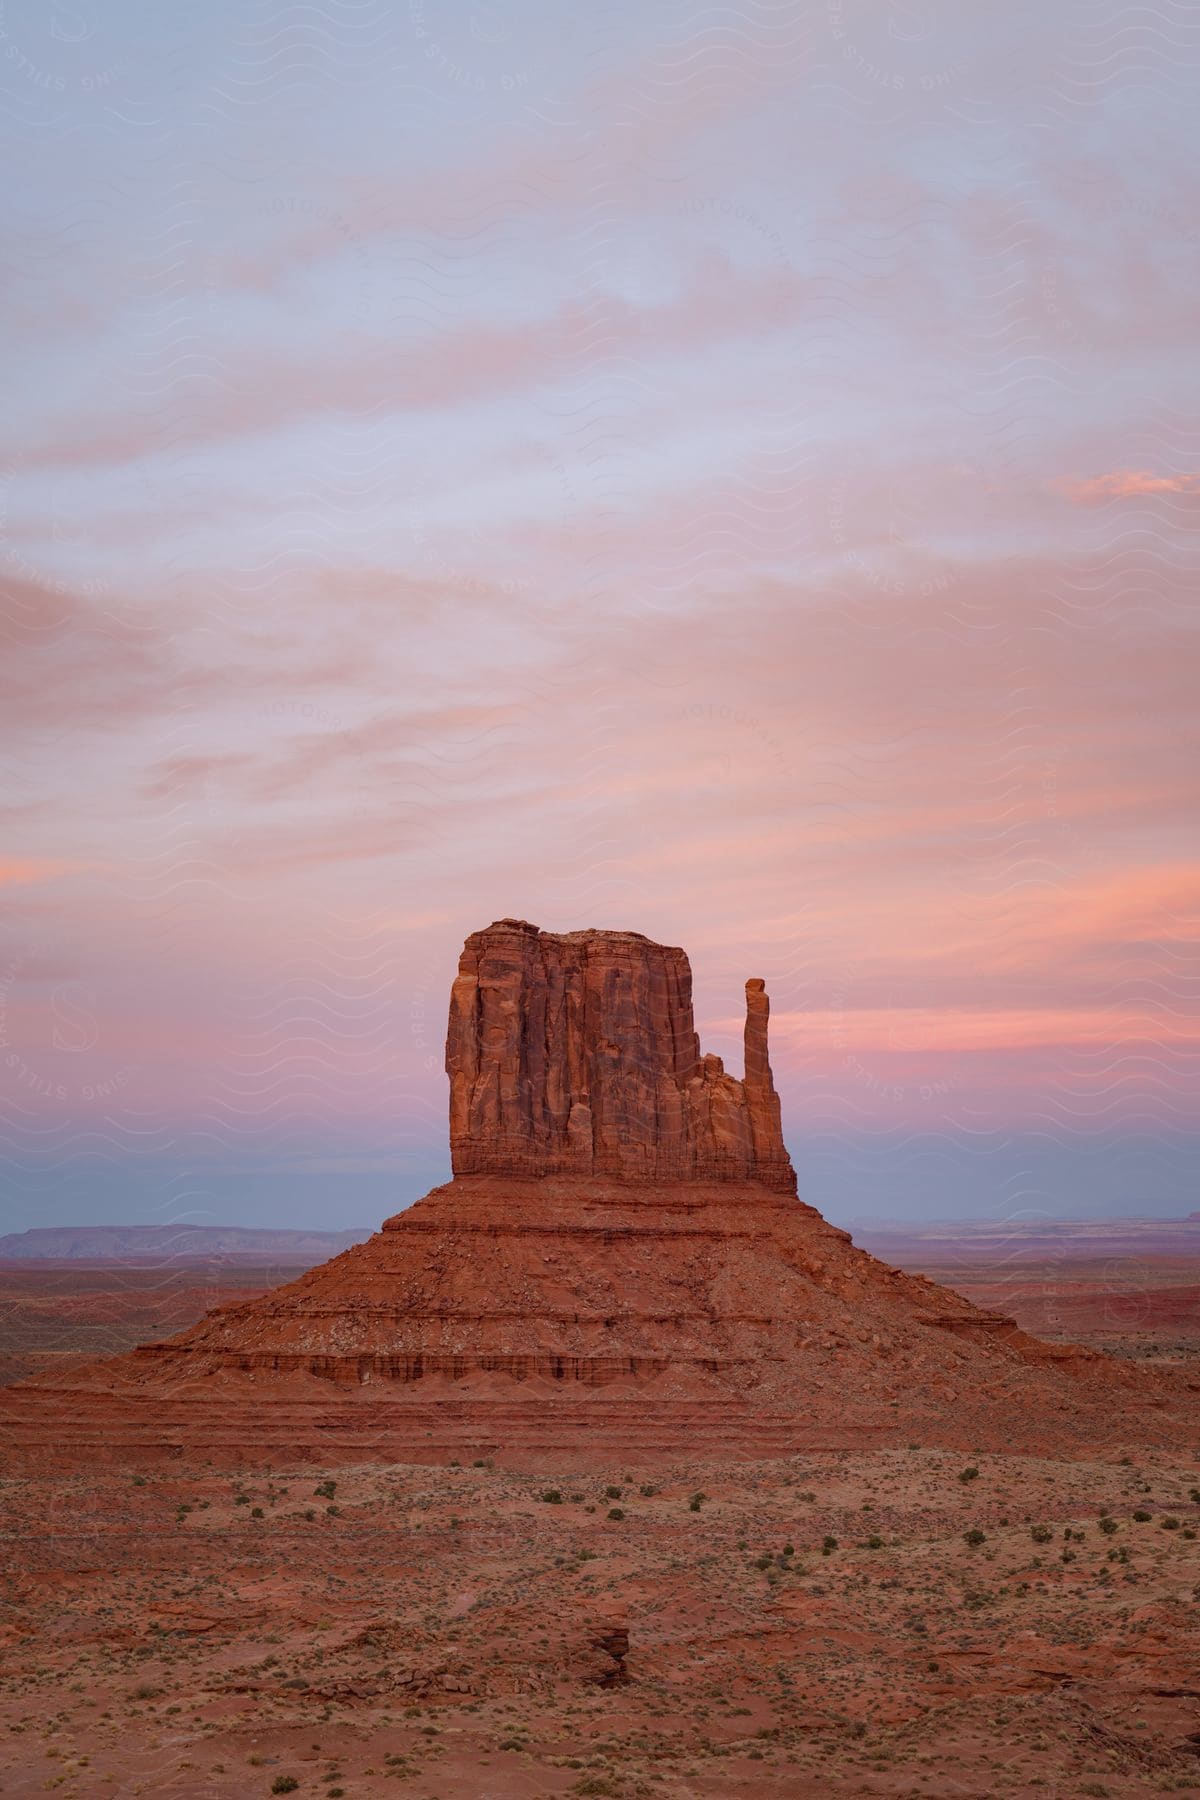 A tall rock formation in a desert mesa plateau under a pink and purple sky